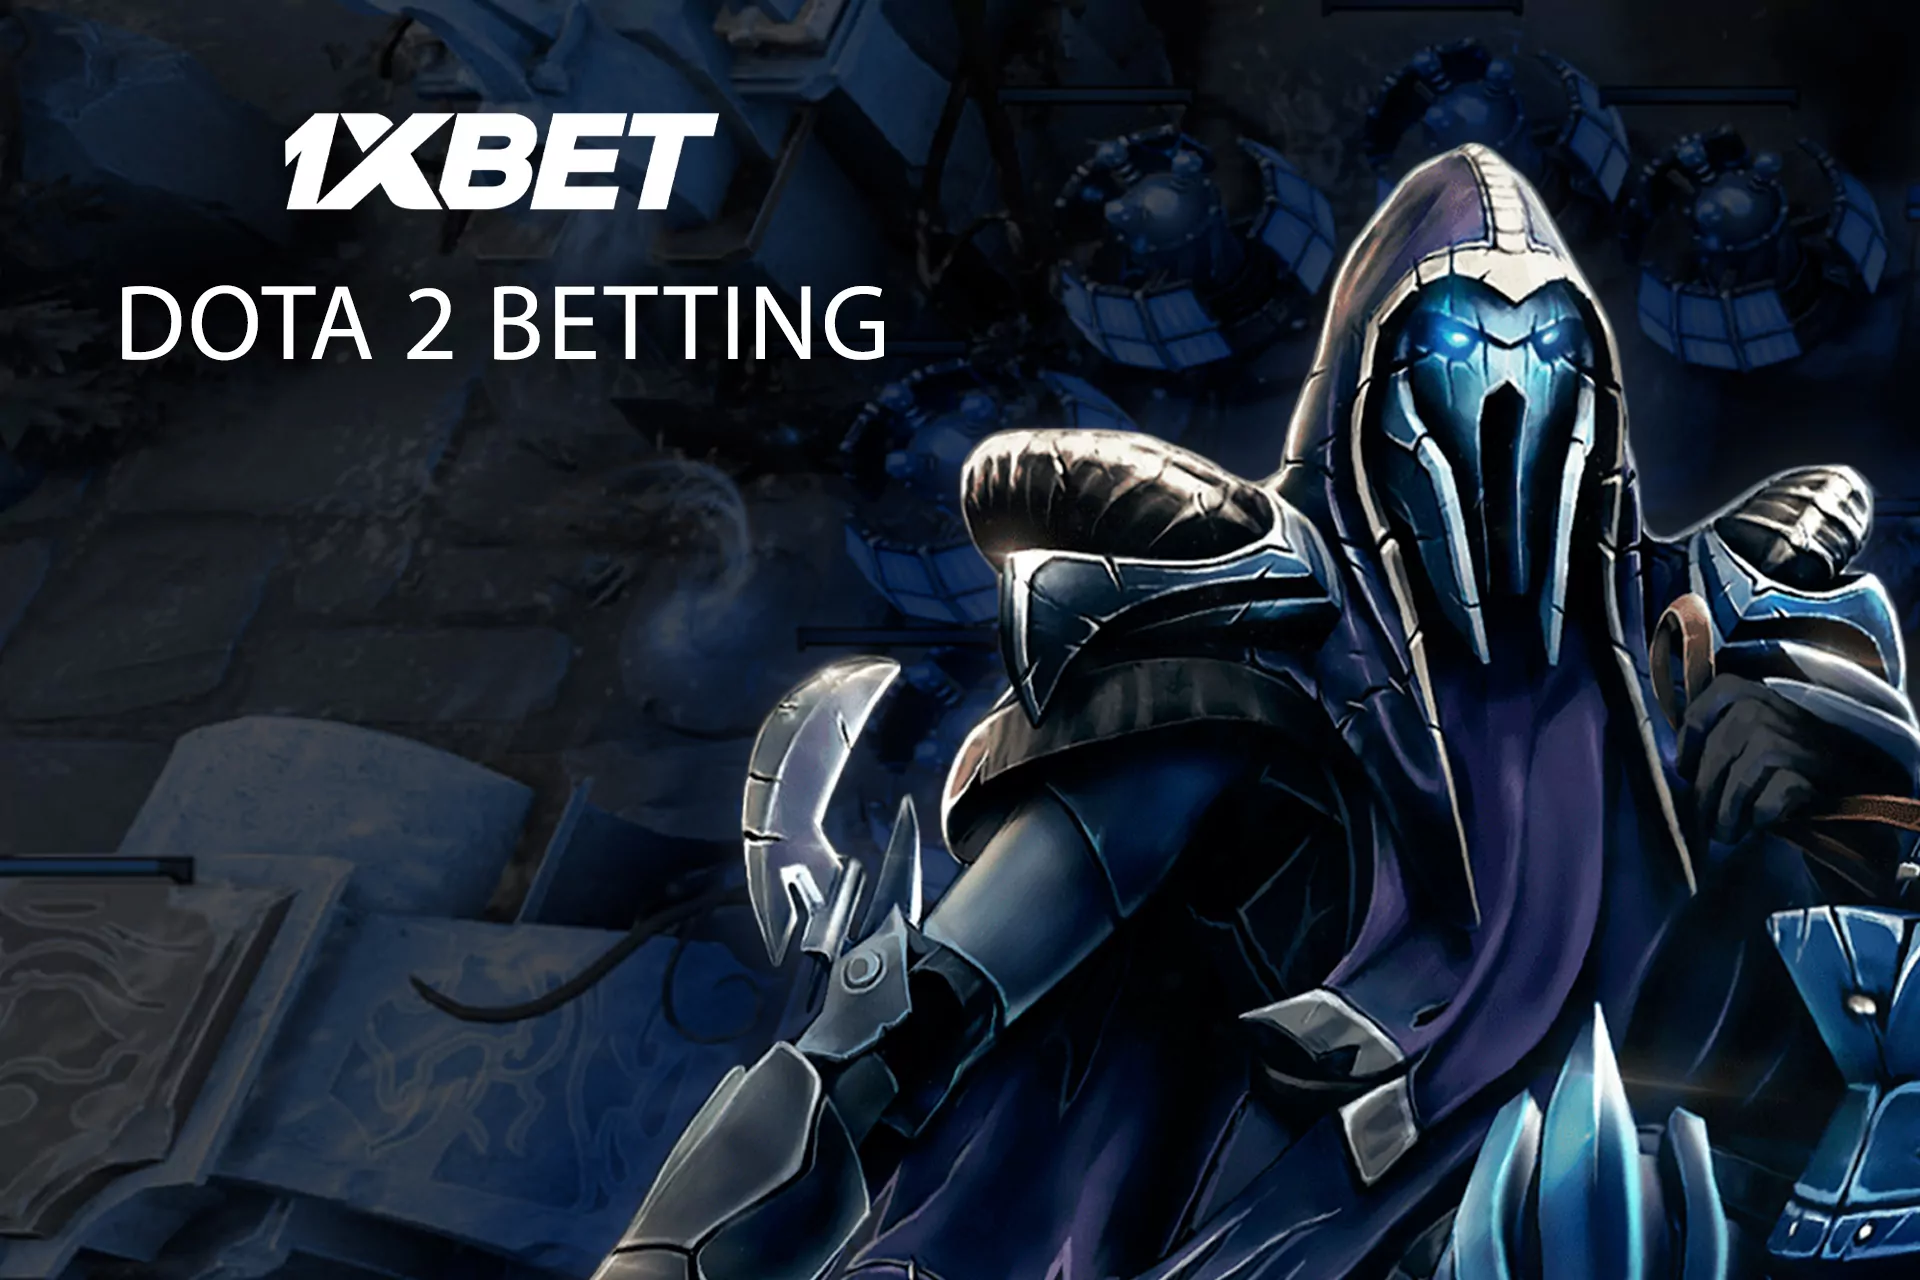 1xbet offers bets on Dota 2 tournaments.